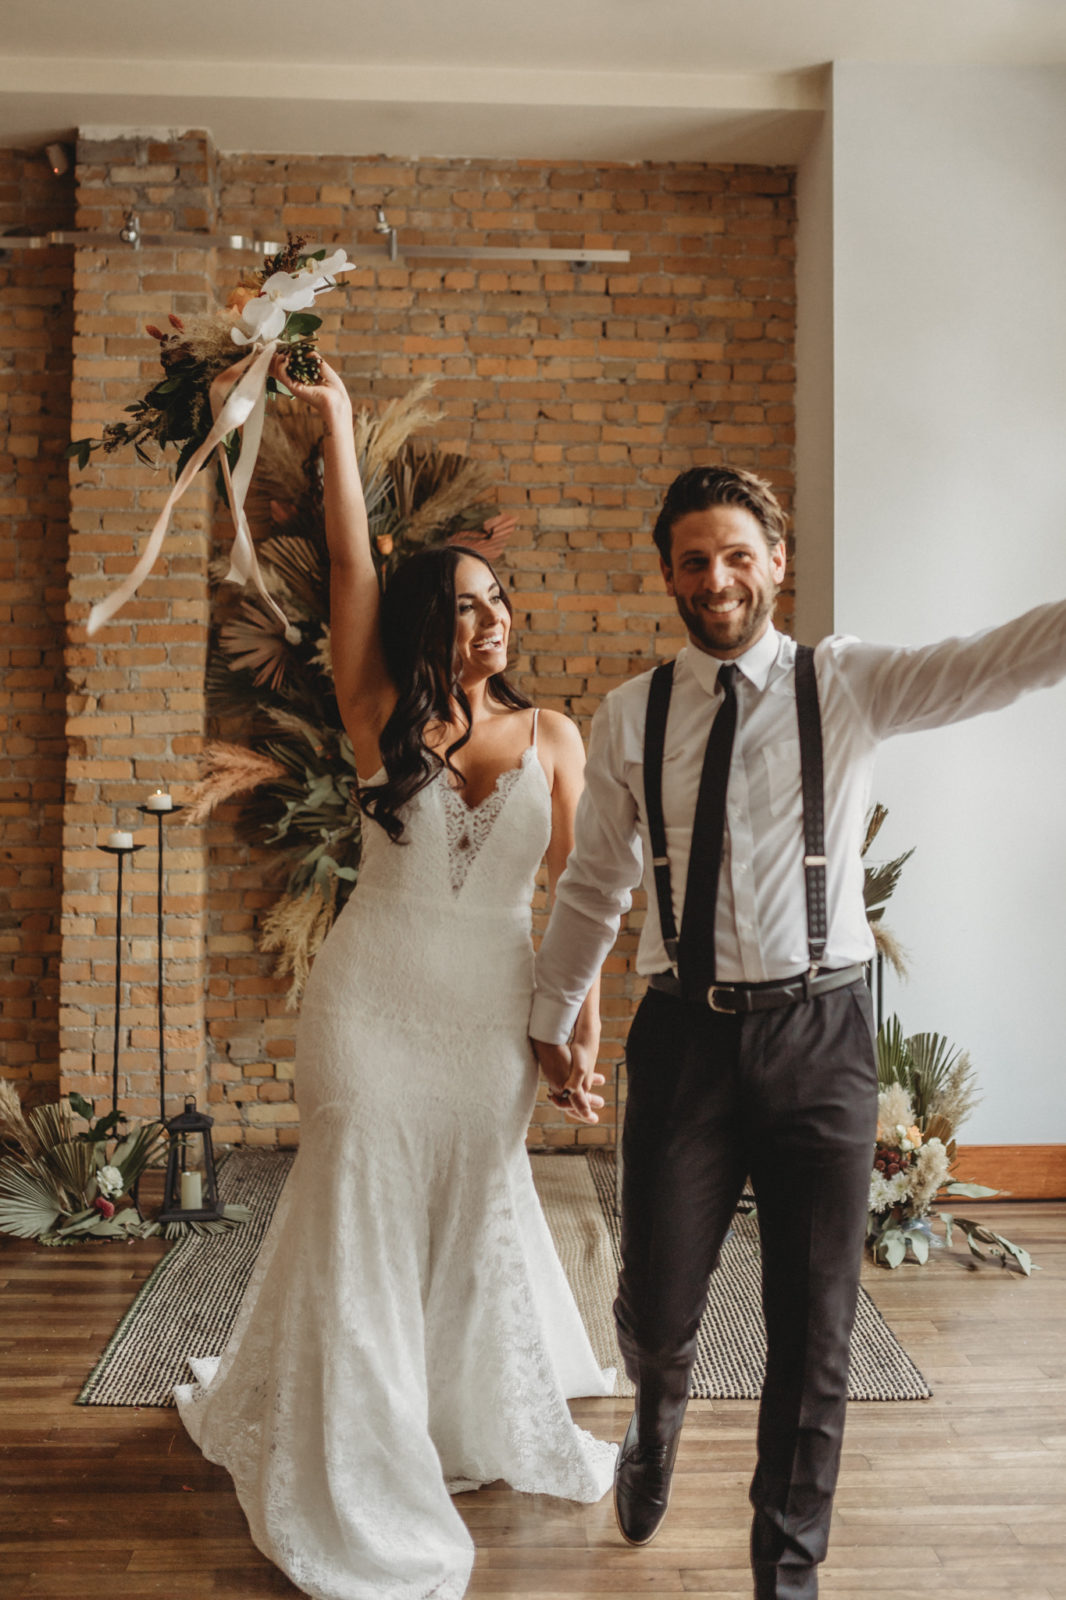 Bride and groom celebrate in front of their dried floral ceremony decor styled by Chemistry Events